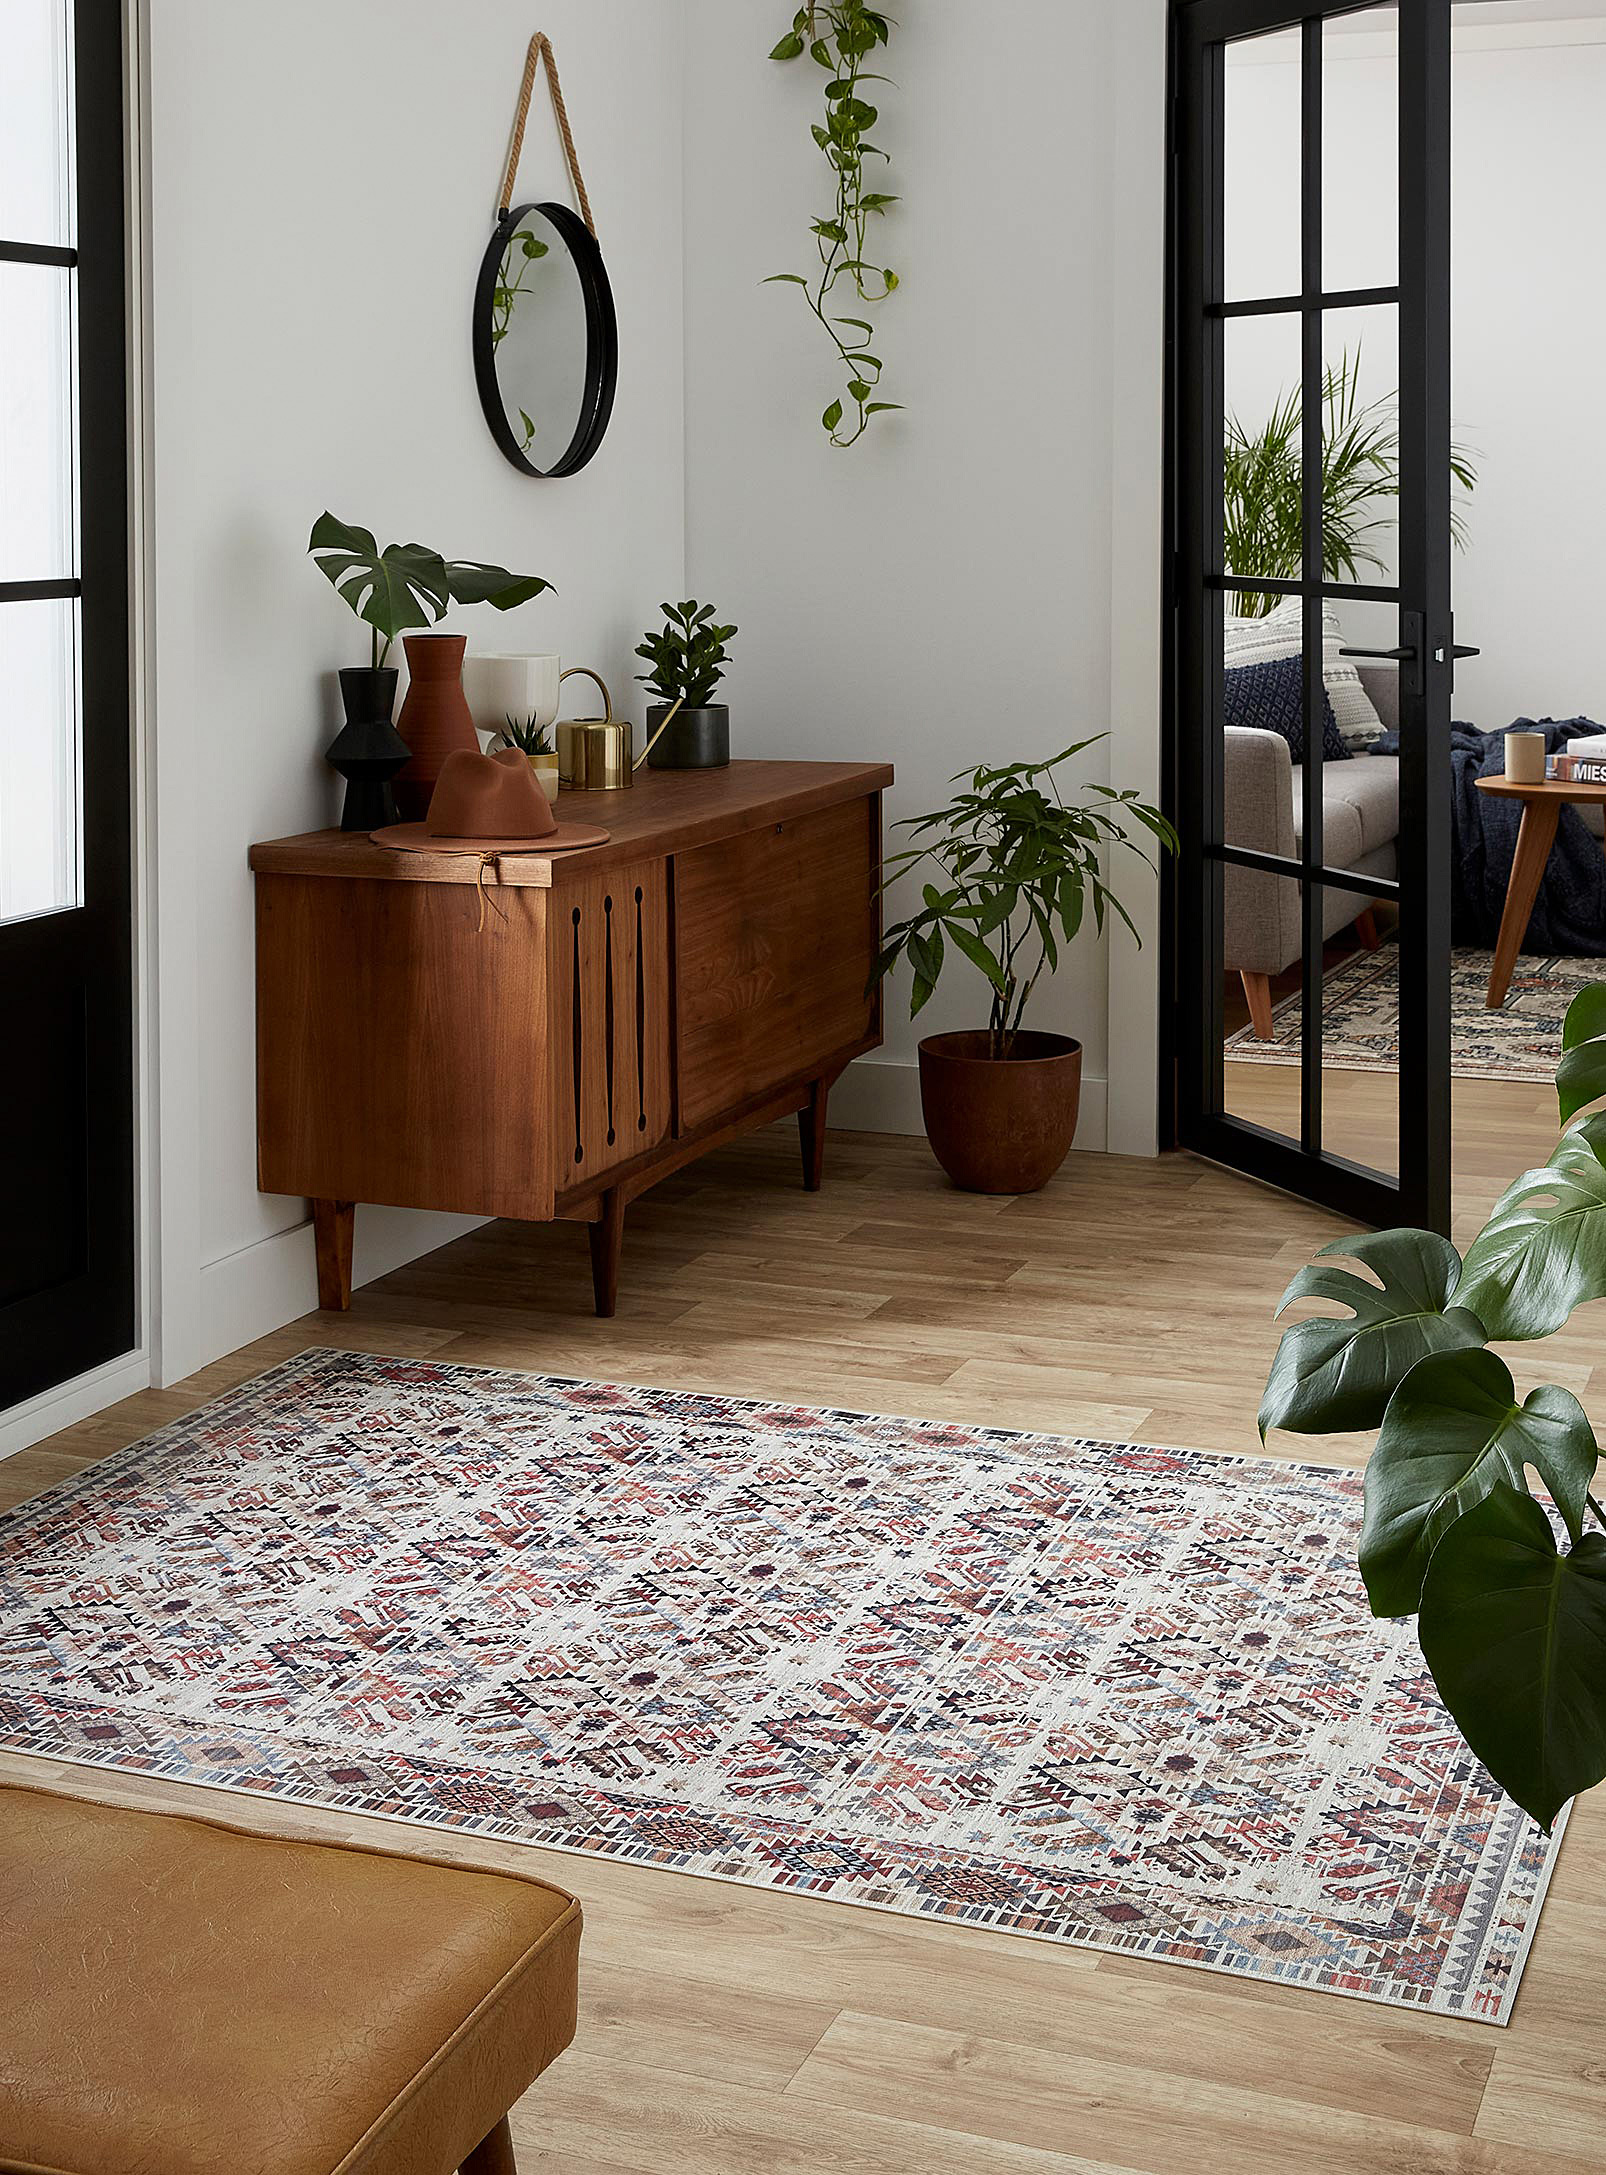 Adama - North African mosaic vinyl rug See available sizes